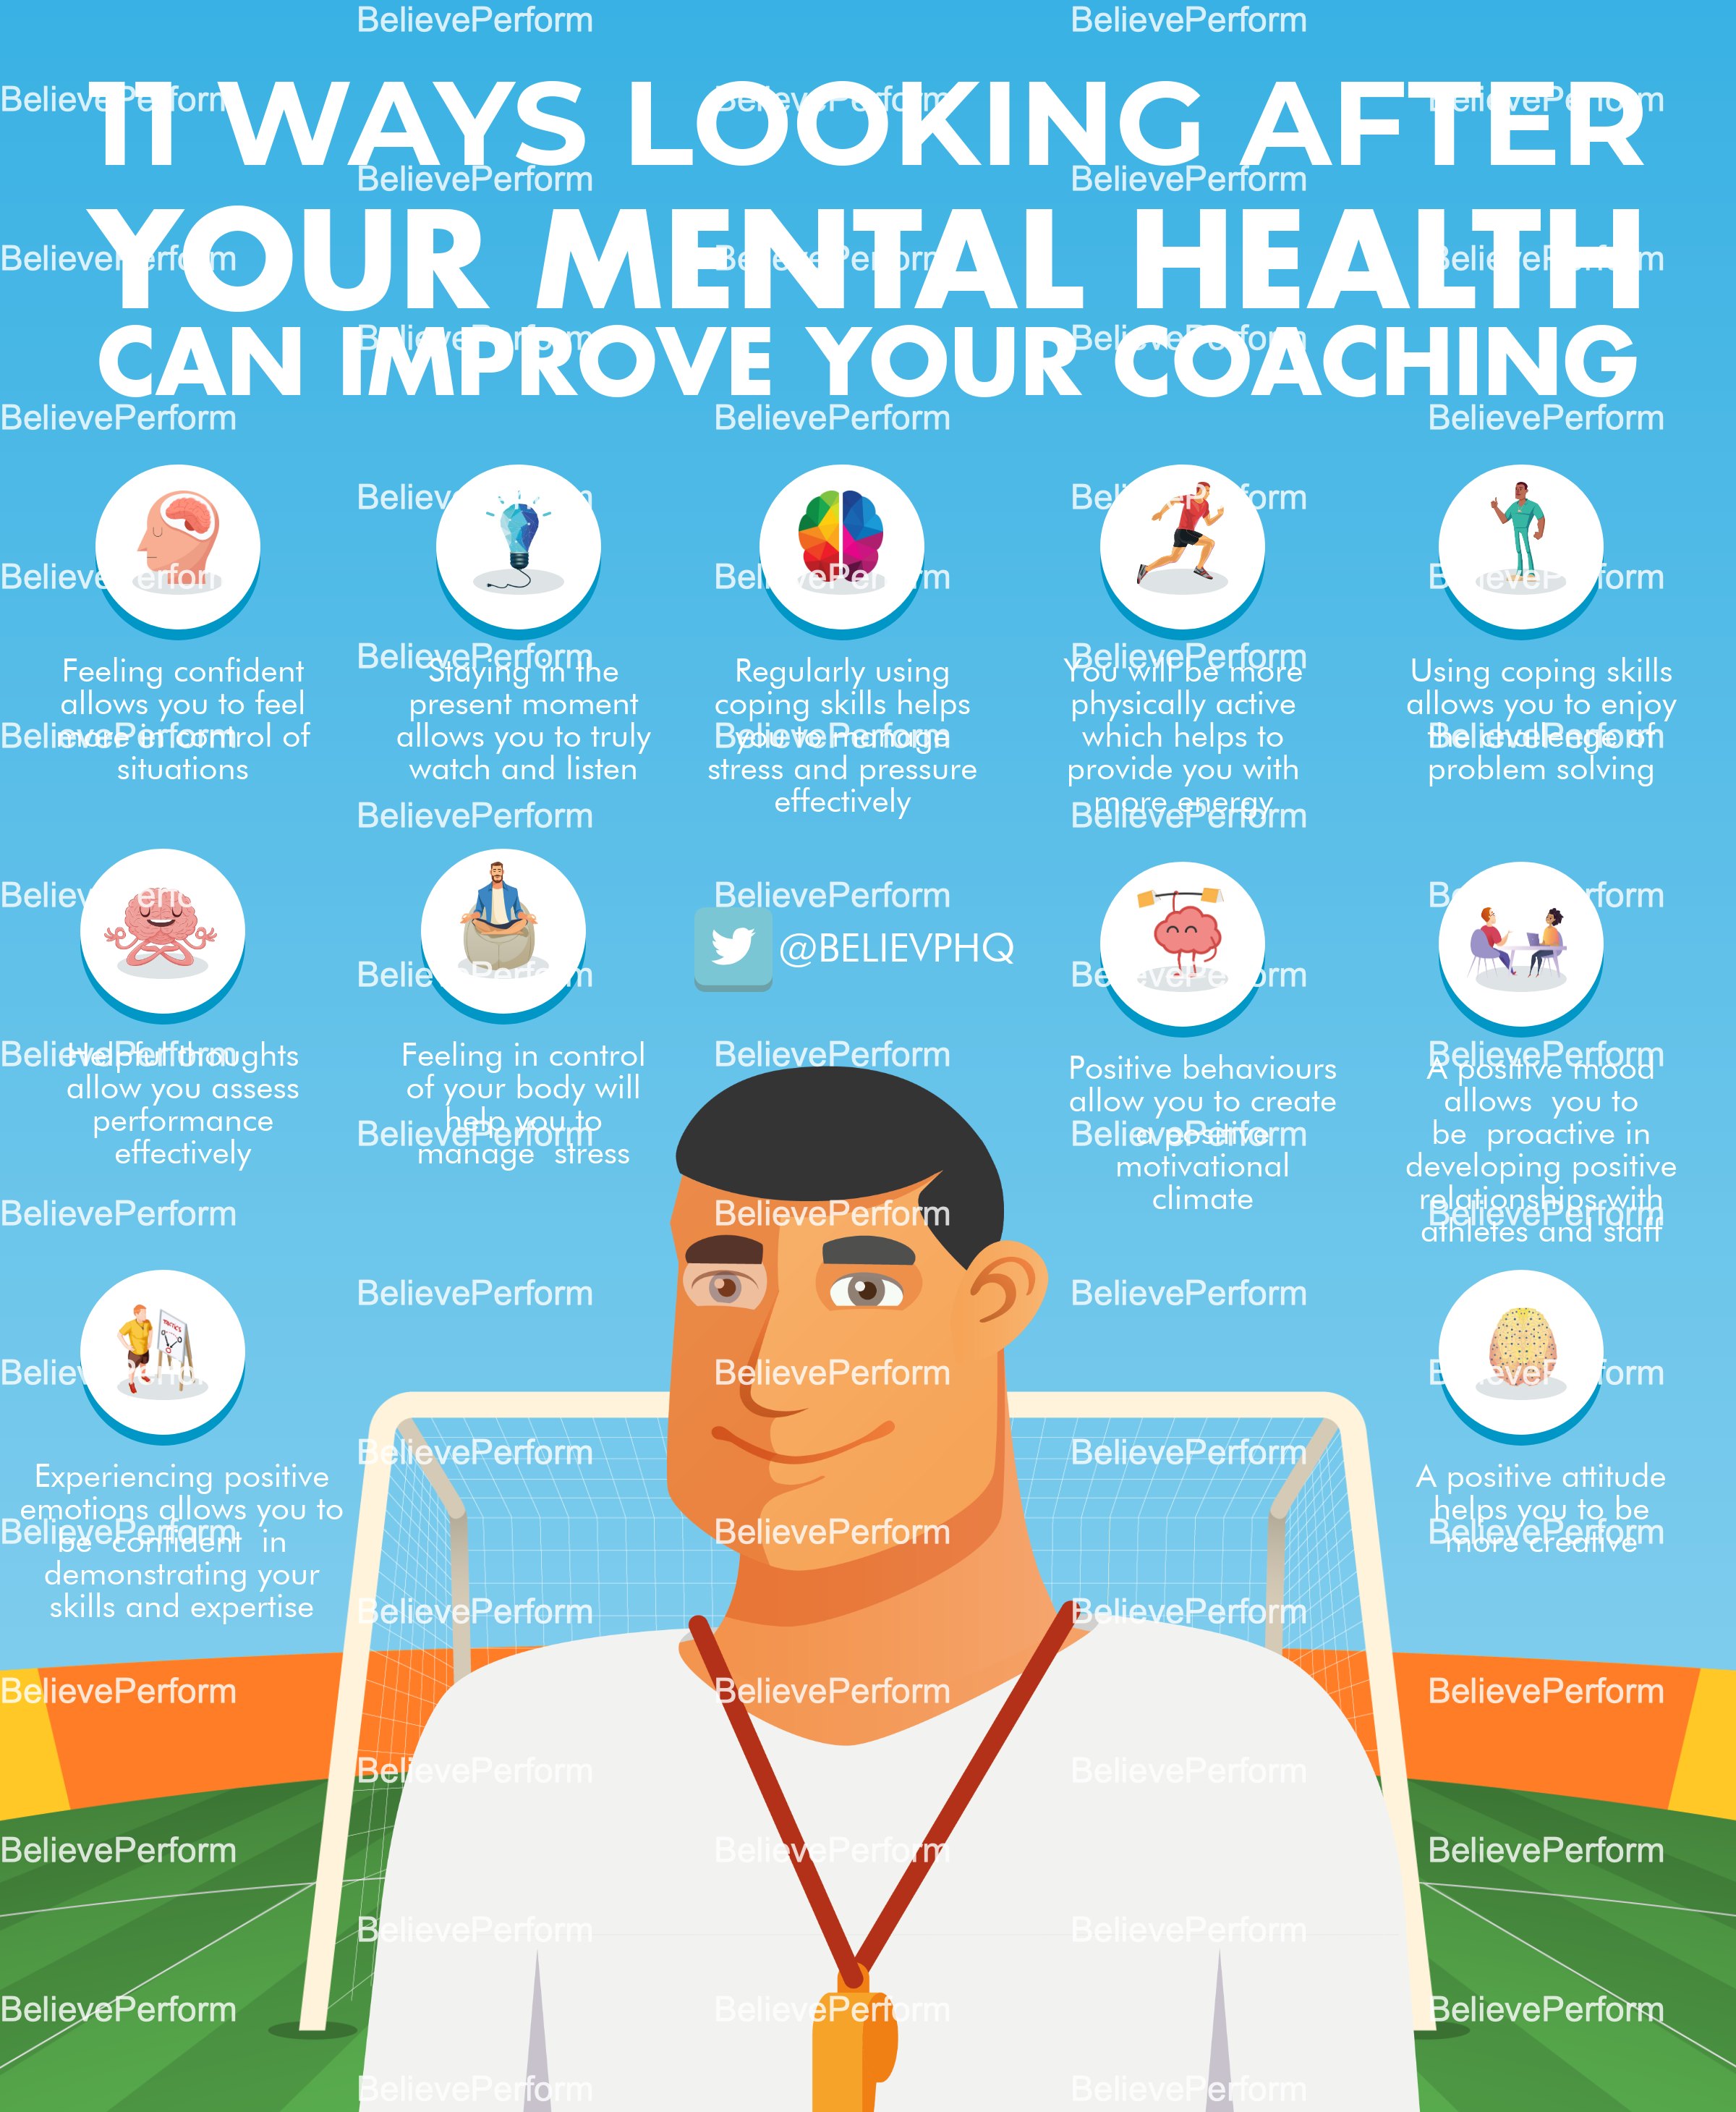 11 Ways Looking After Your Mental Health Can Improve Your Coaching 